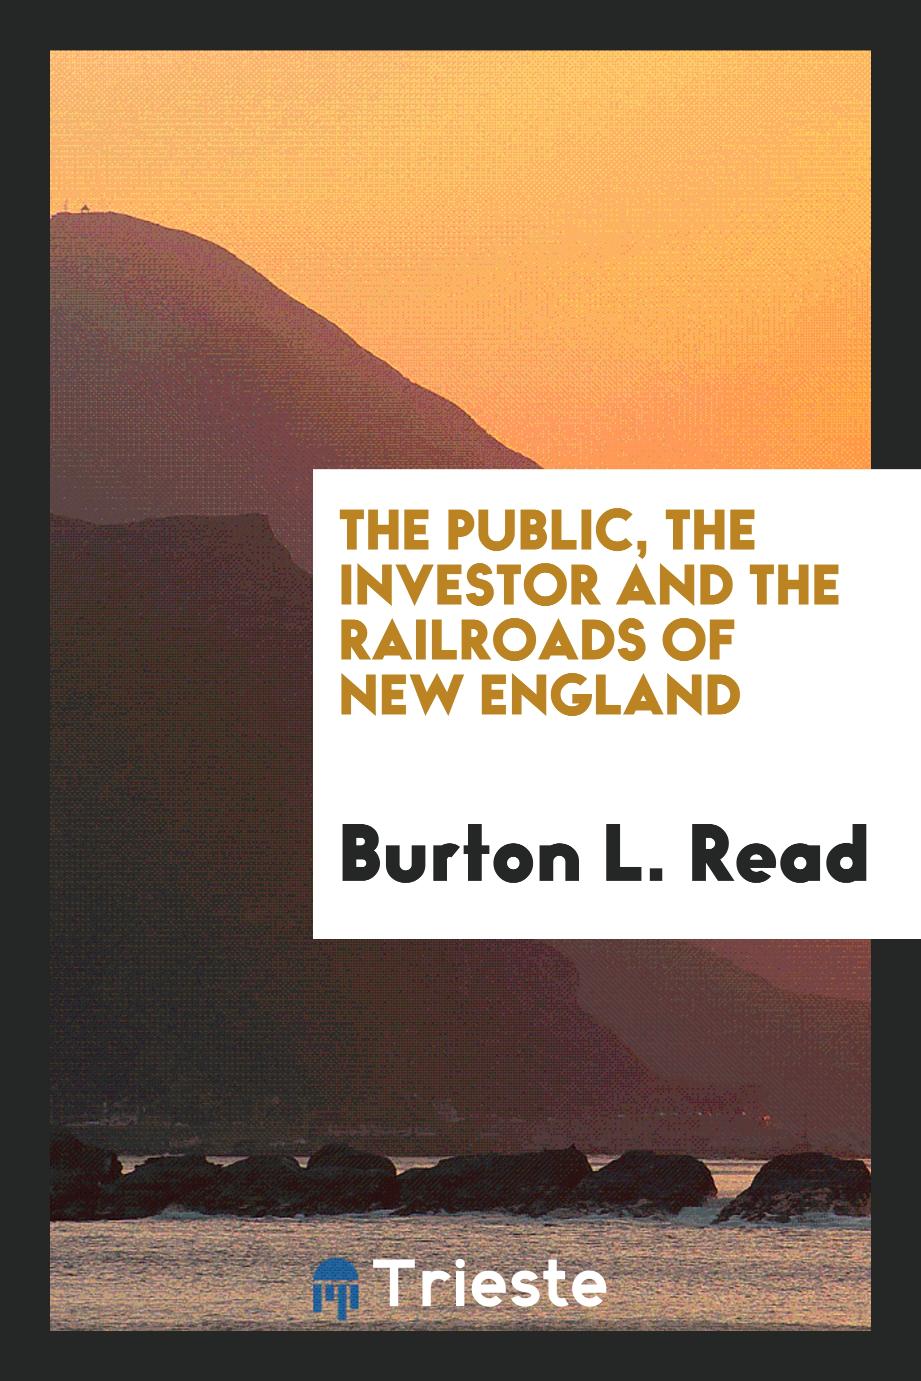 The Public, the Investor and the Railroads of New England